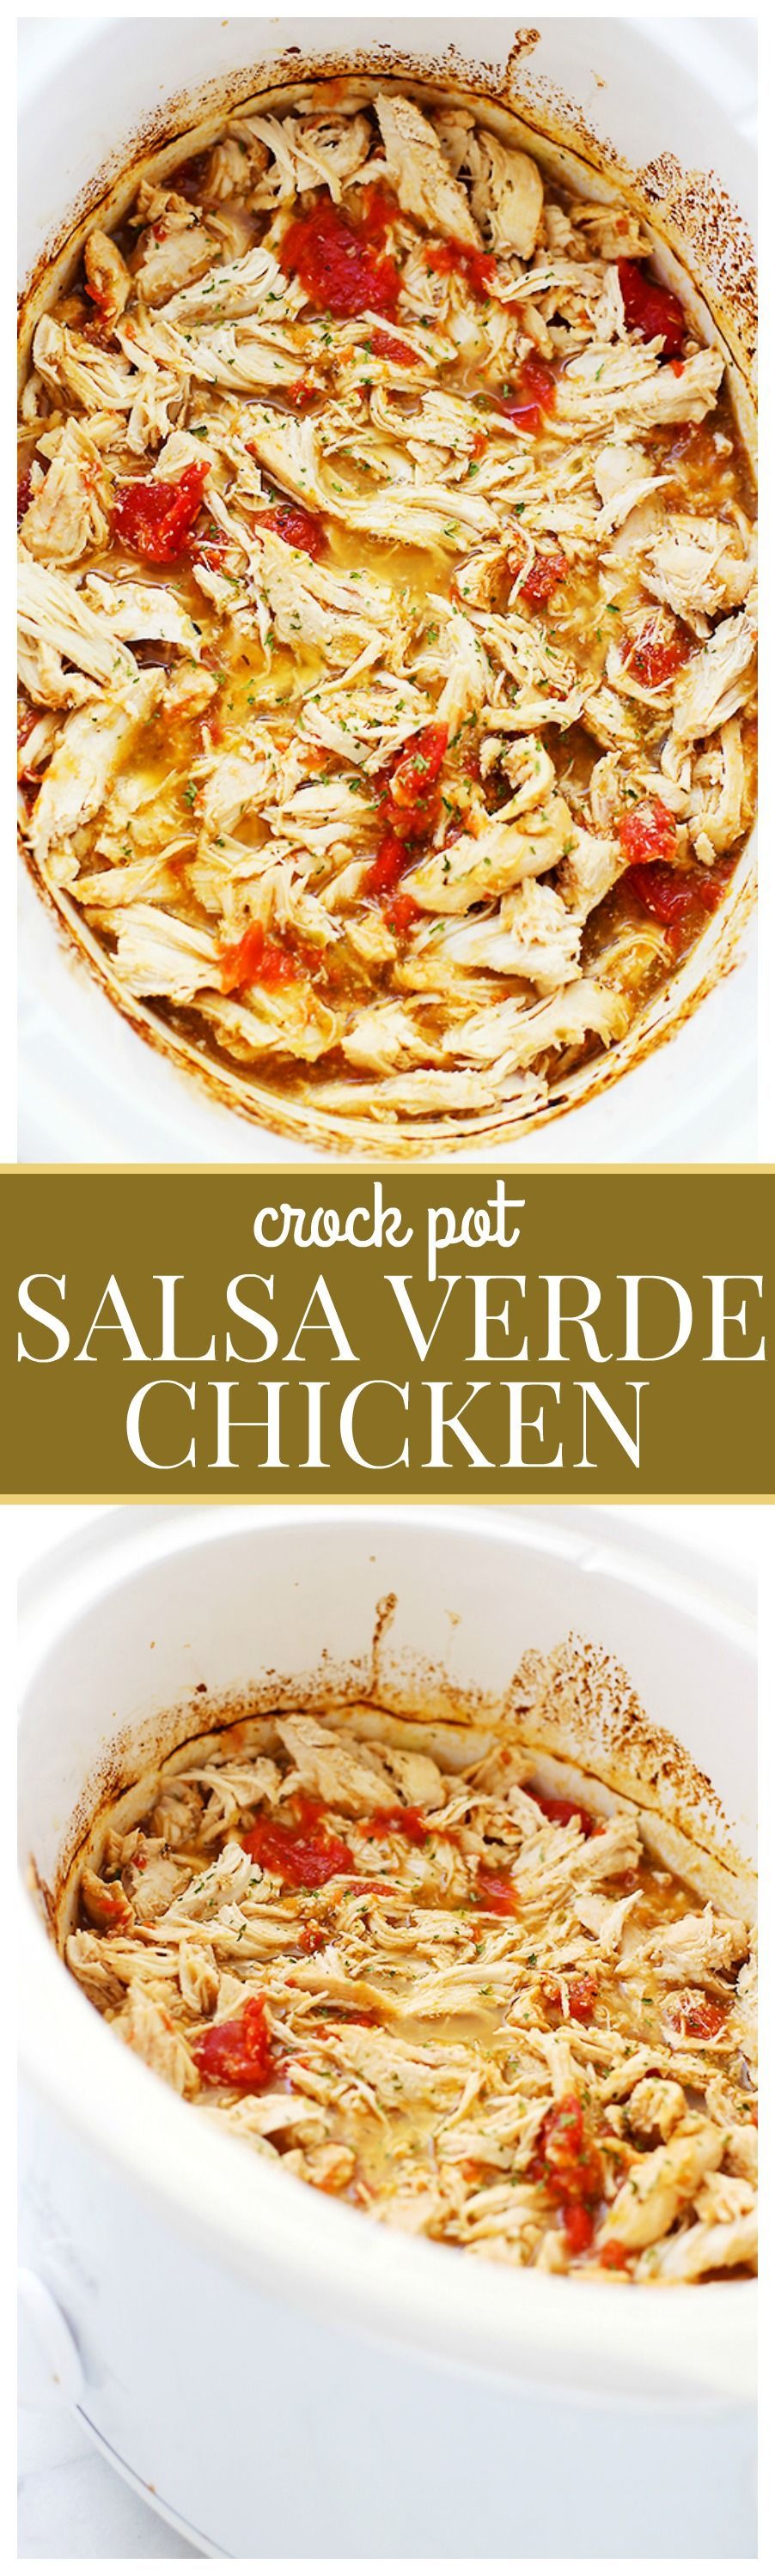 Easy Crock Pot Salsa Verde Chicken – Loaded with salsa verde and delicious chopped tomatoes, this healthy crock pot chicken is